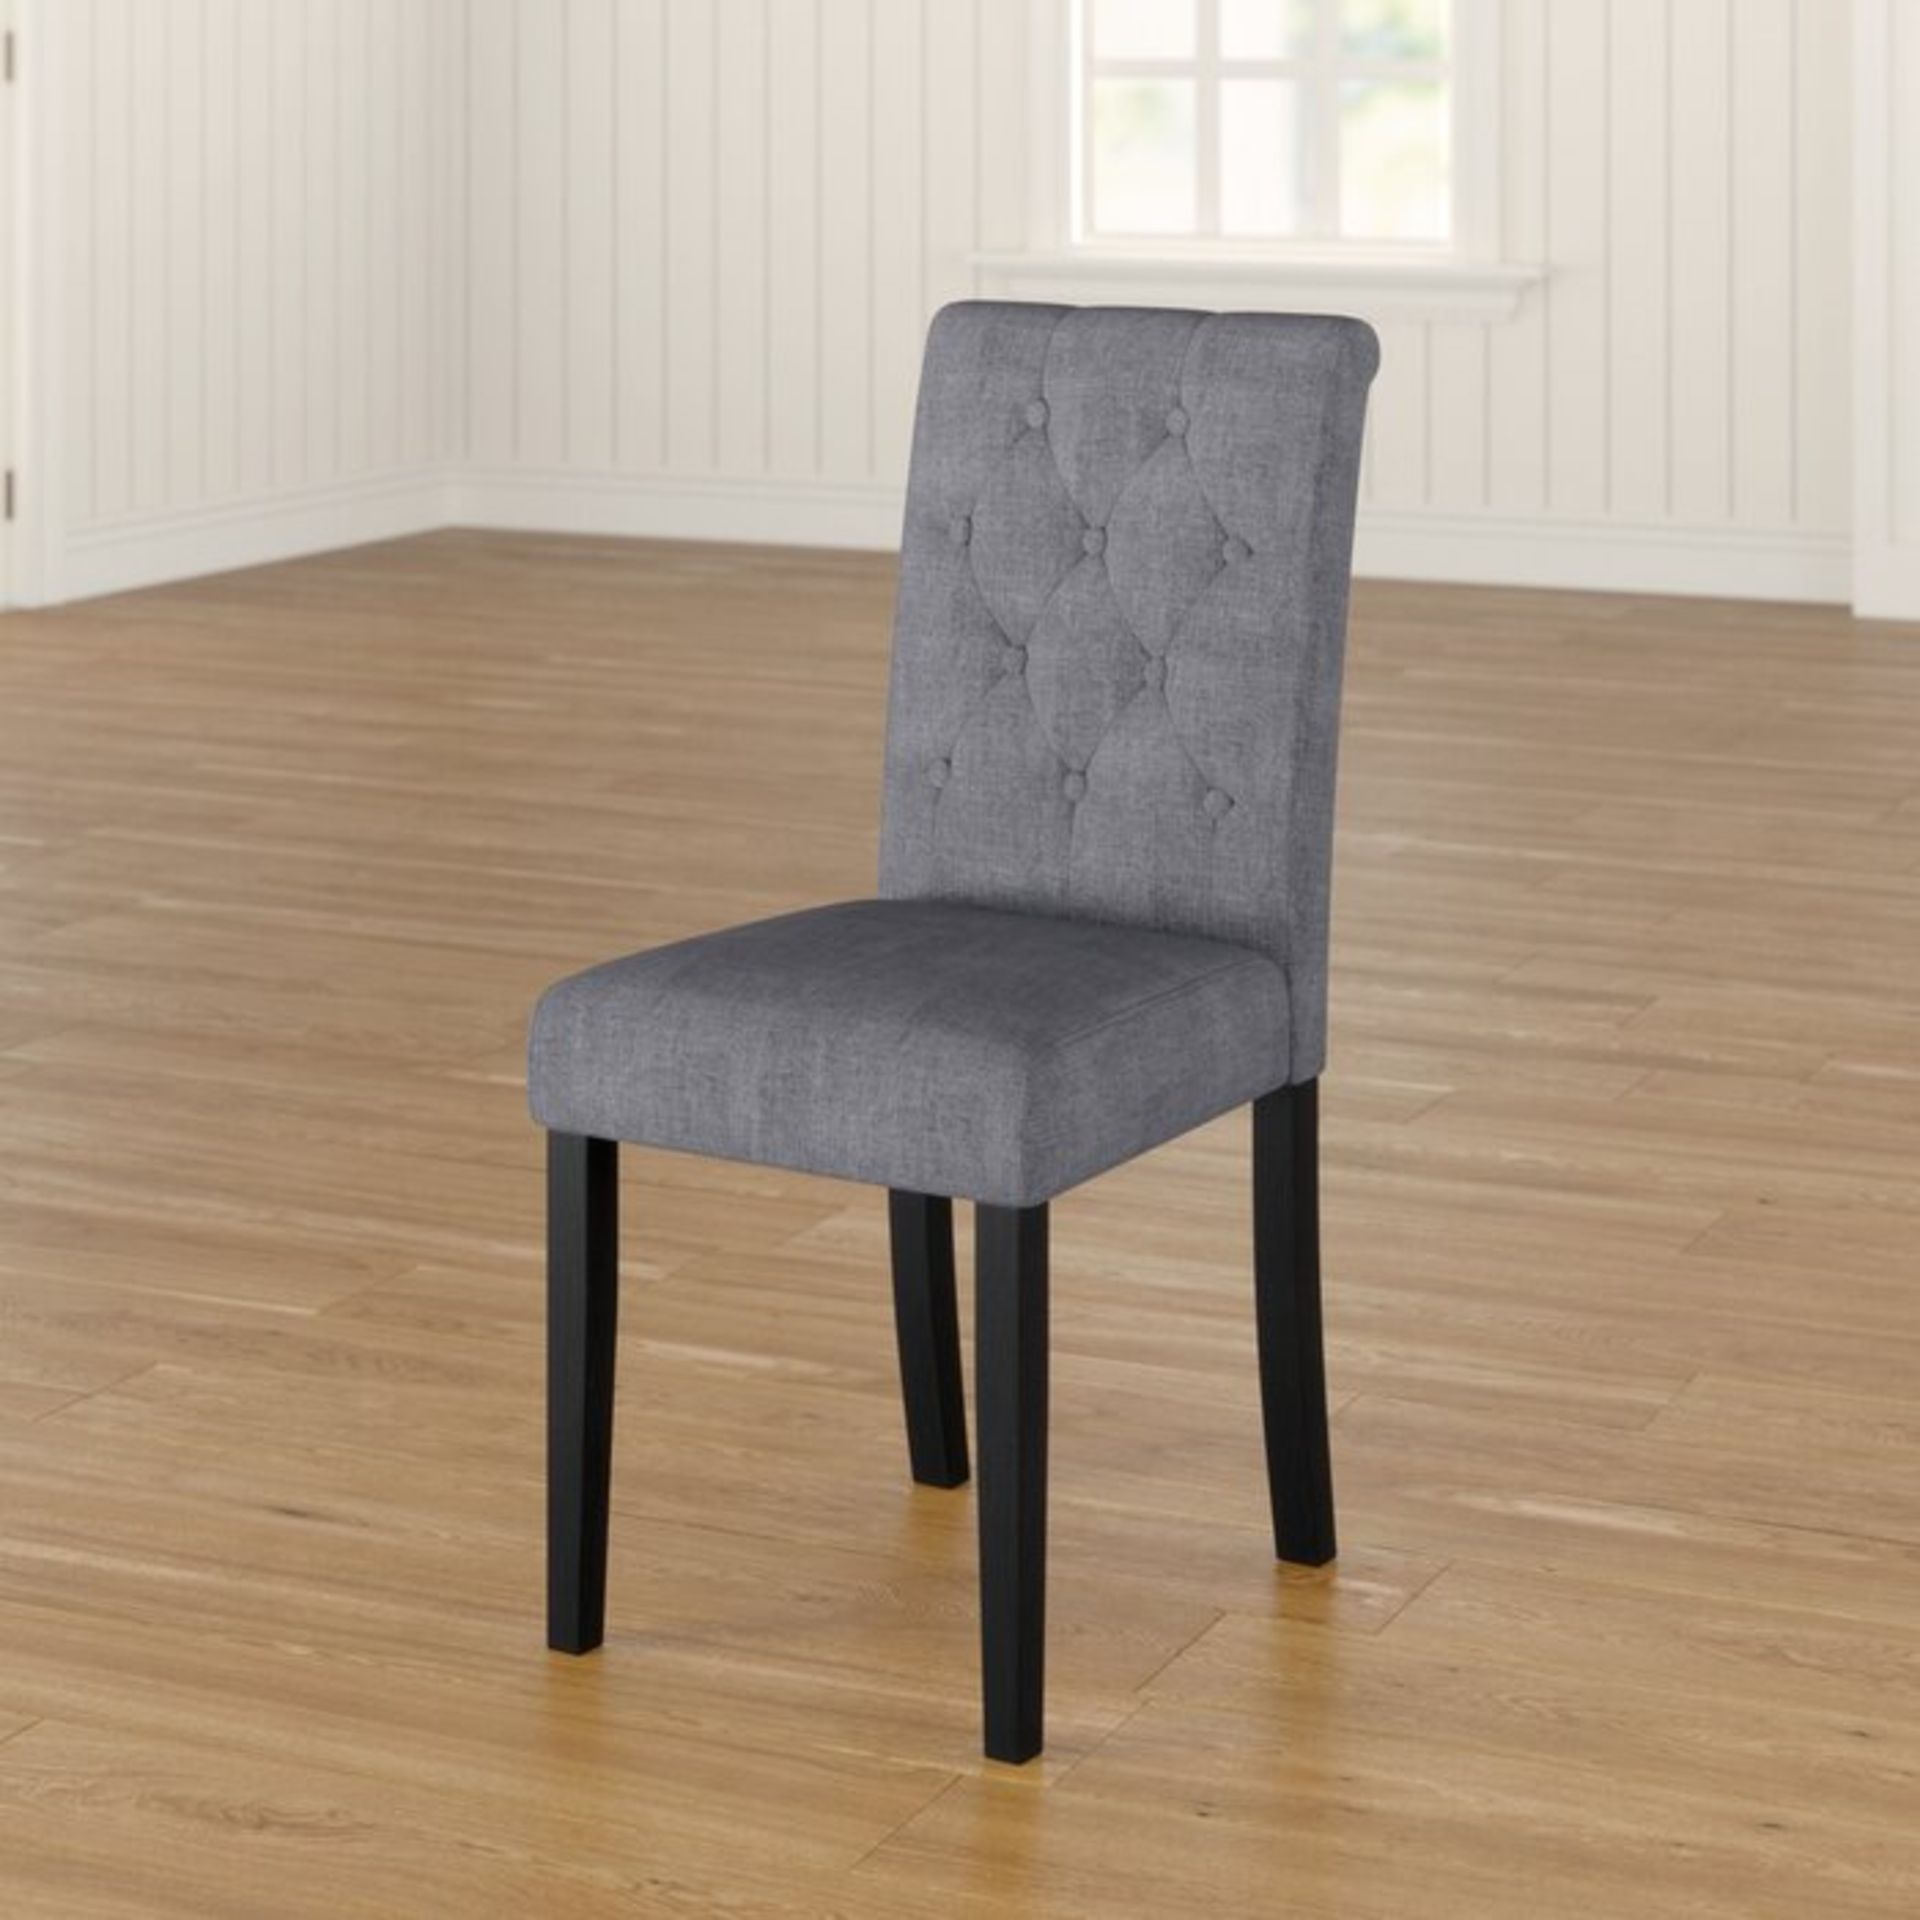 Brick and Barrel Upholstered Dining Chair (Set of 2) - RRP £96.99 - Image 2 of 2